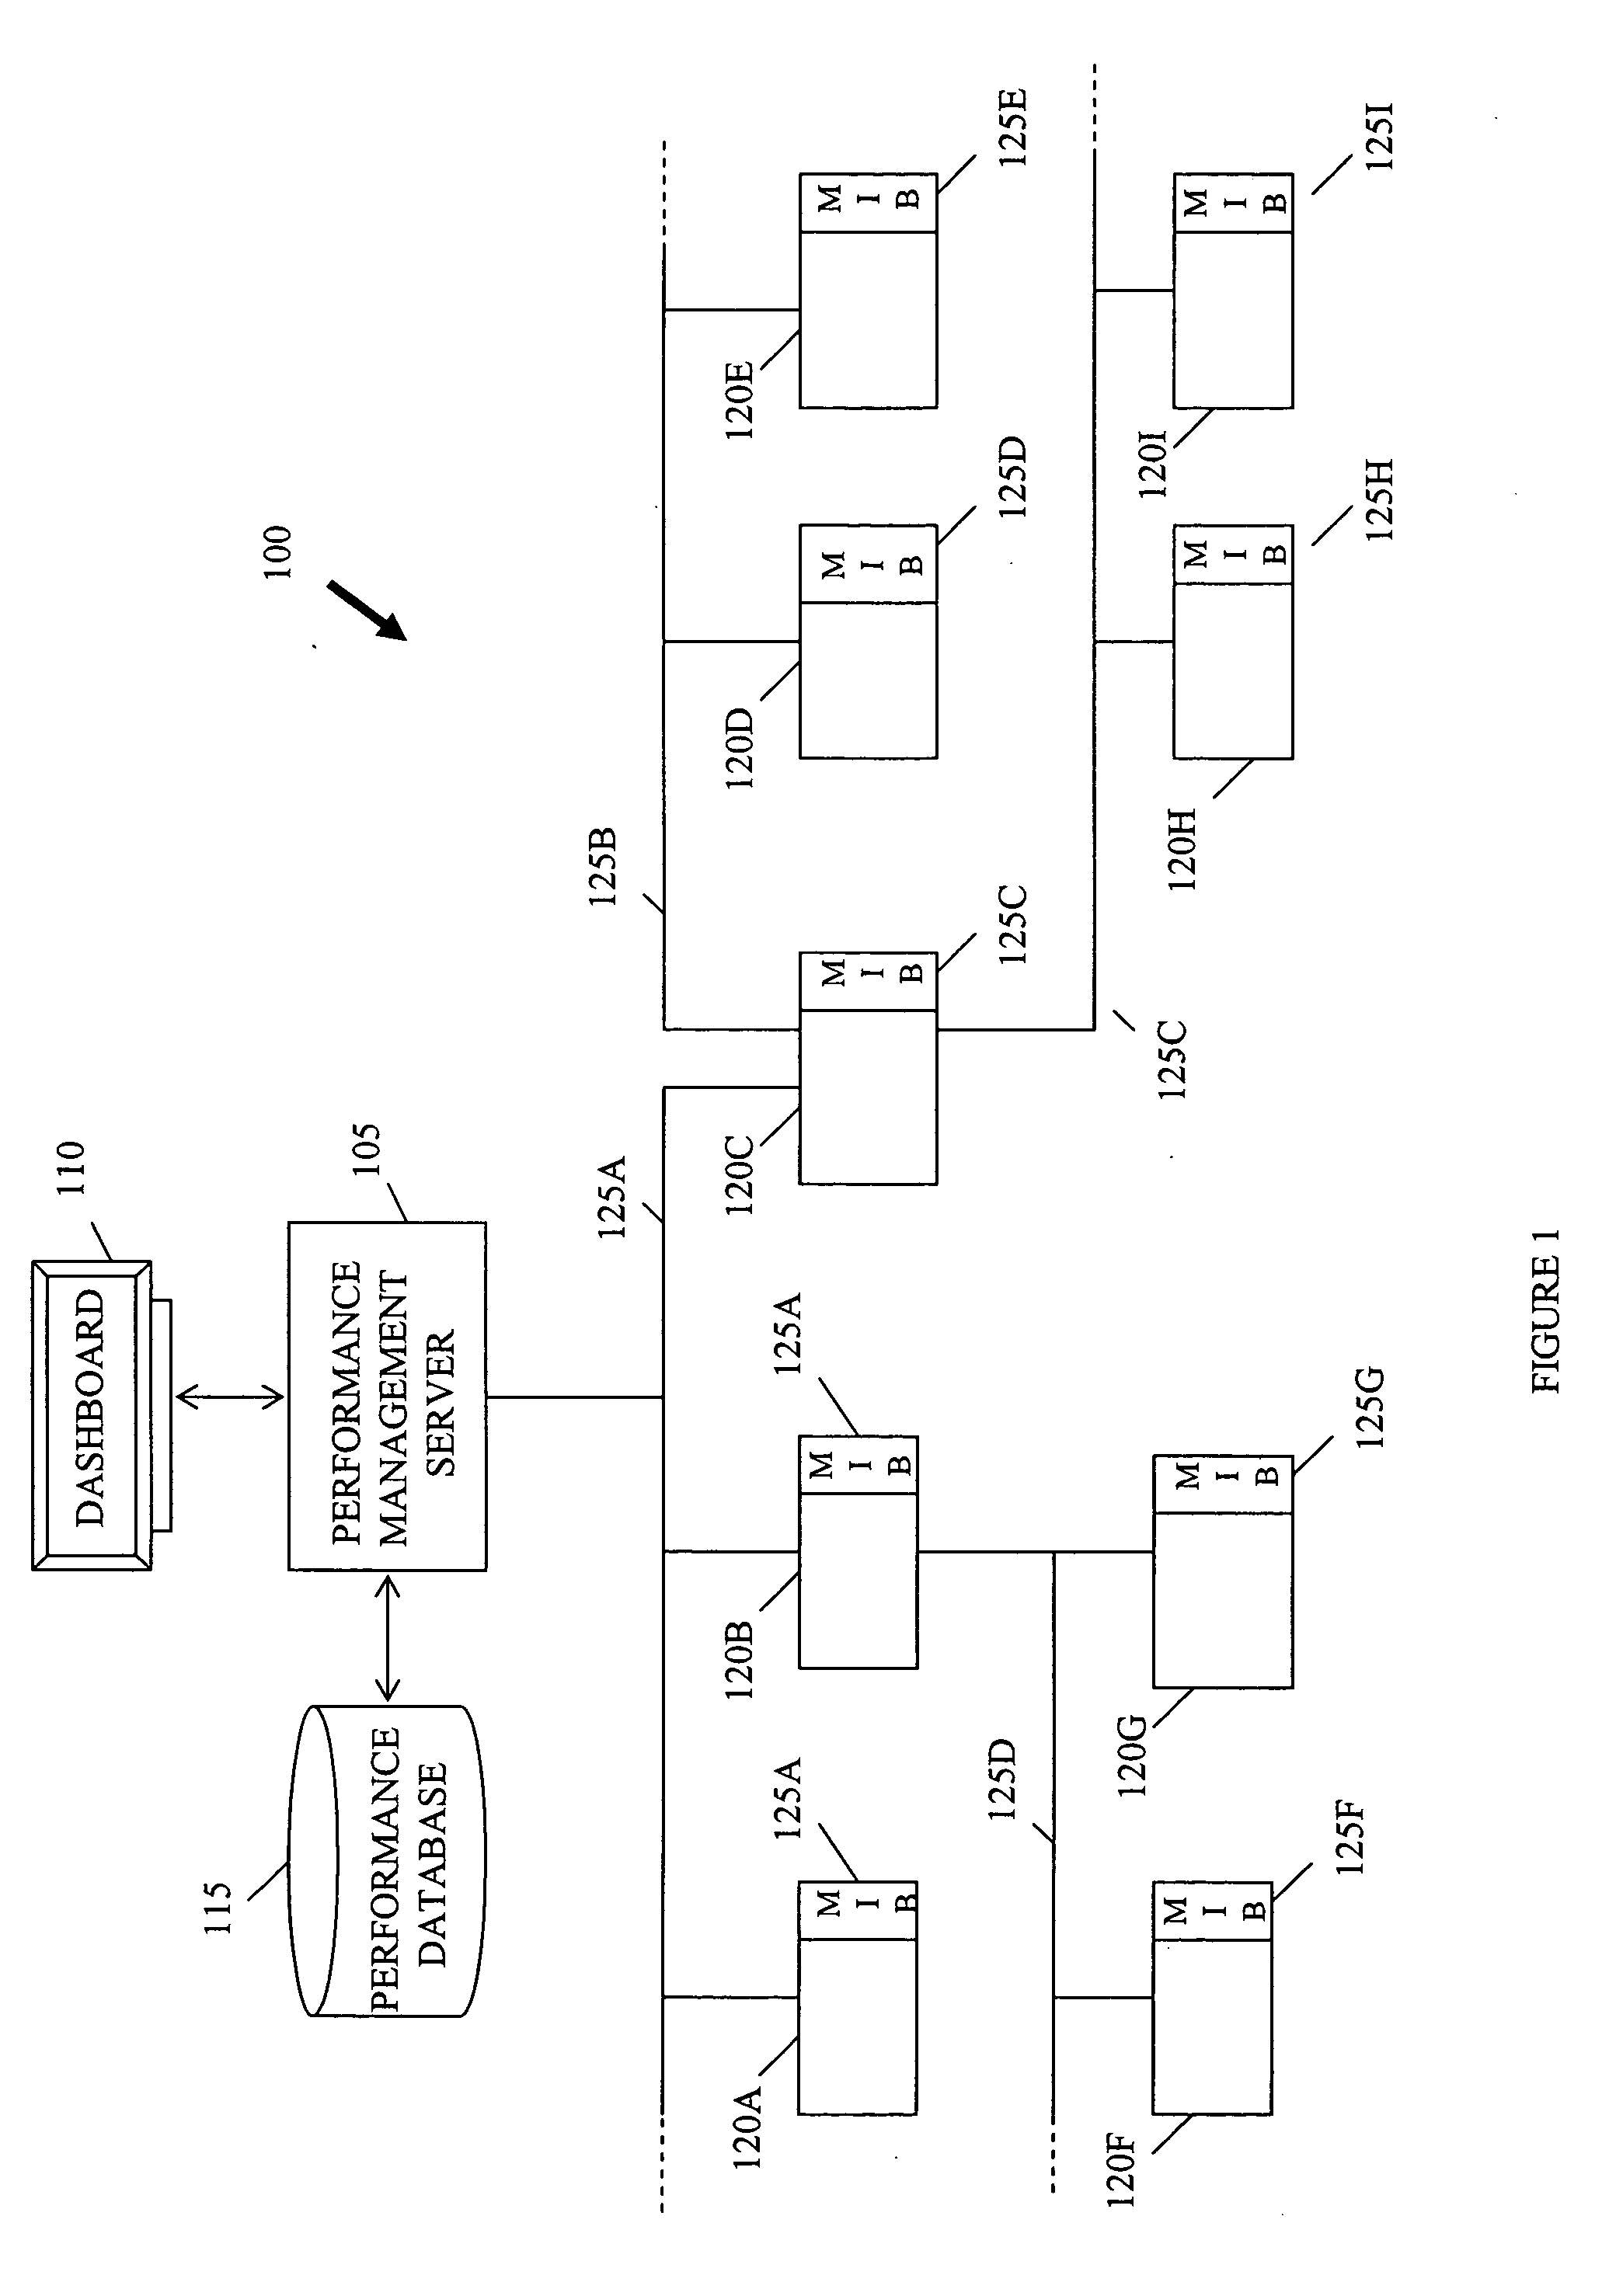 System and method for analysis of communications networks